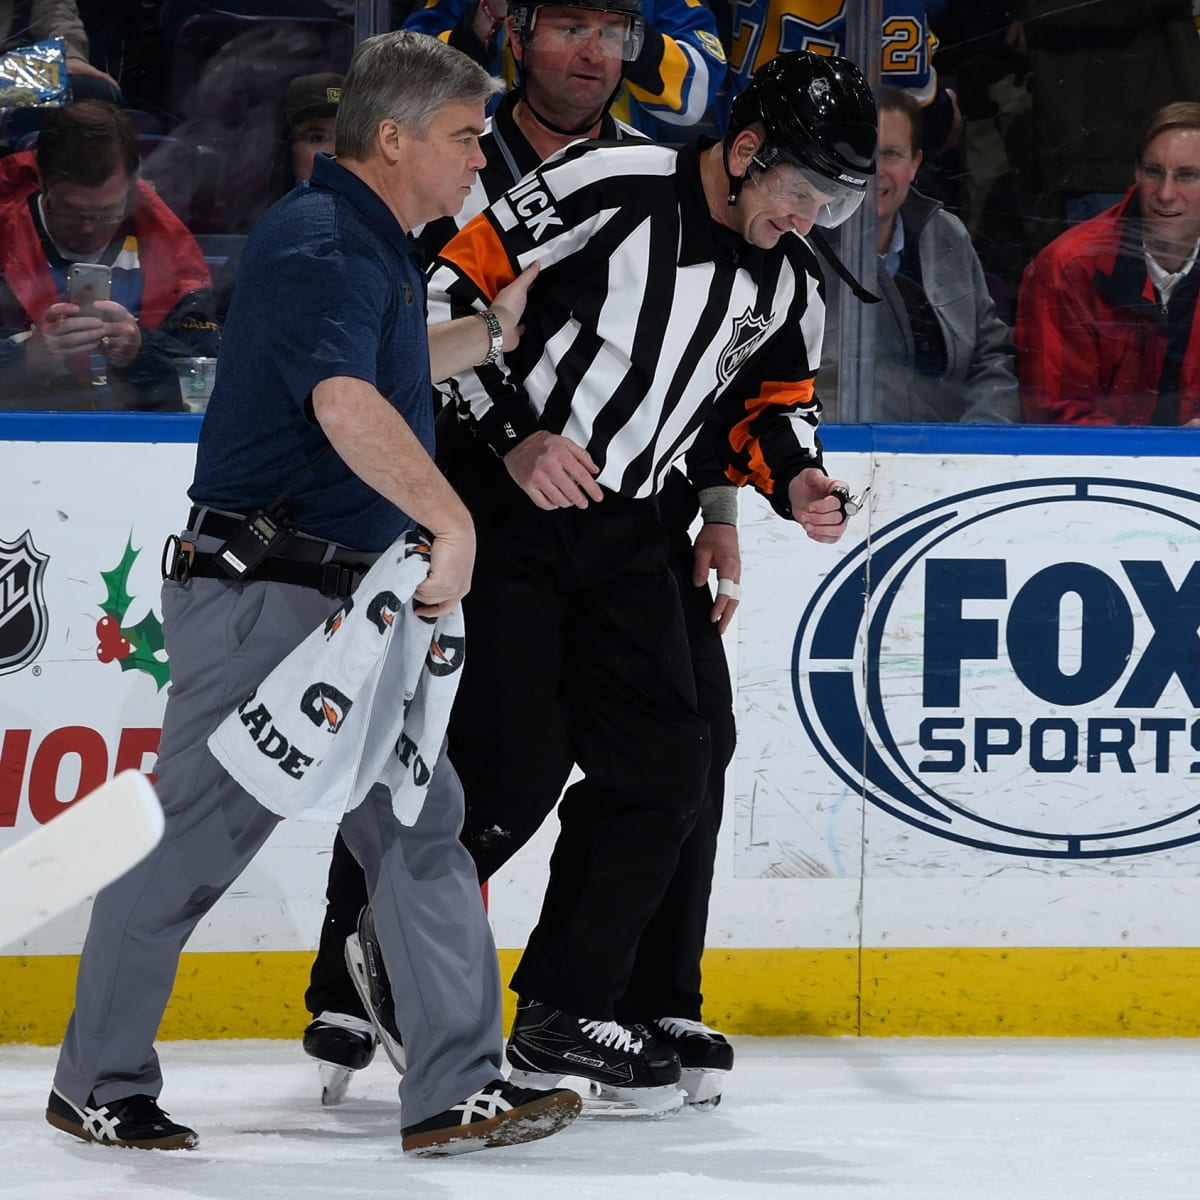 Firing Tim Peel does nothing to address NHL officiating